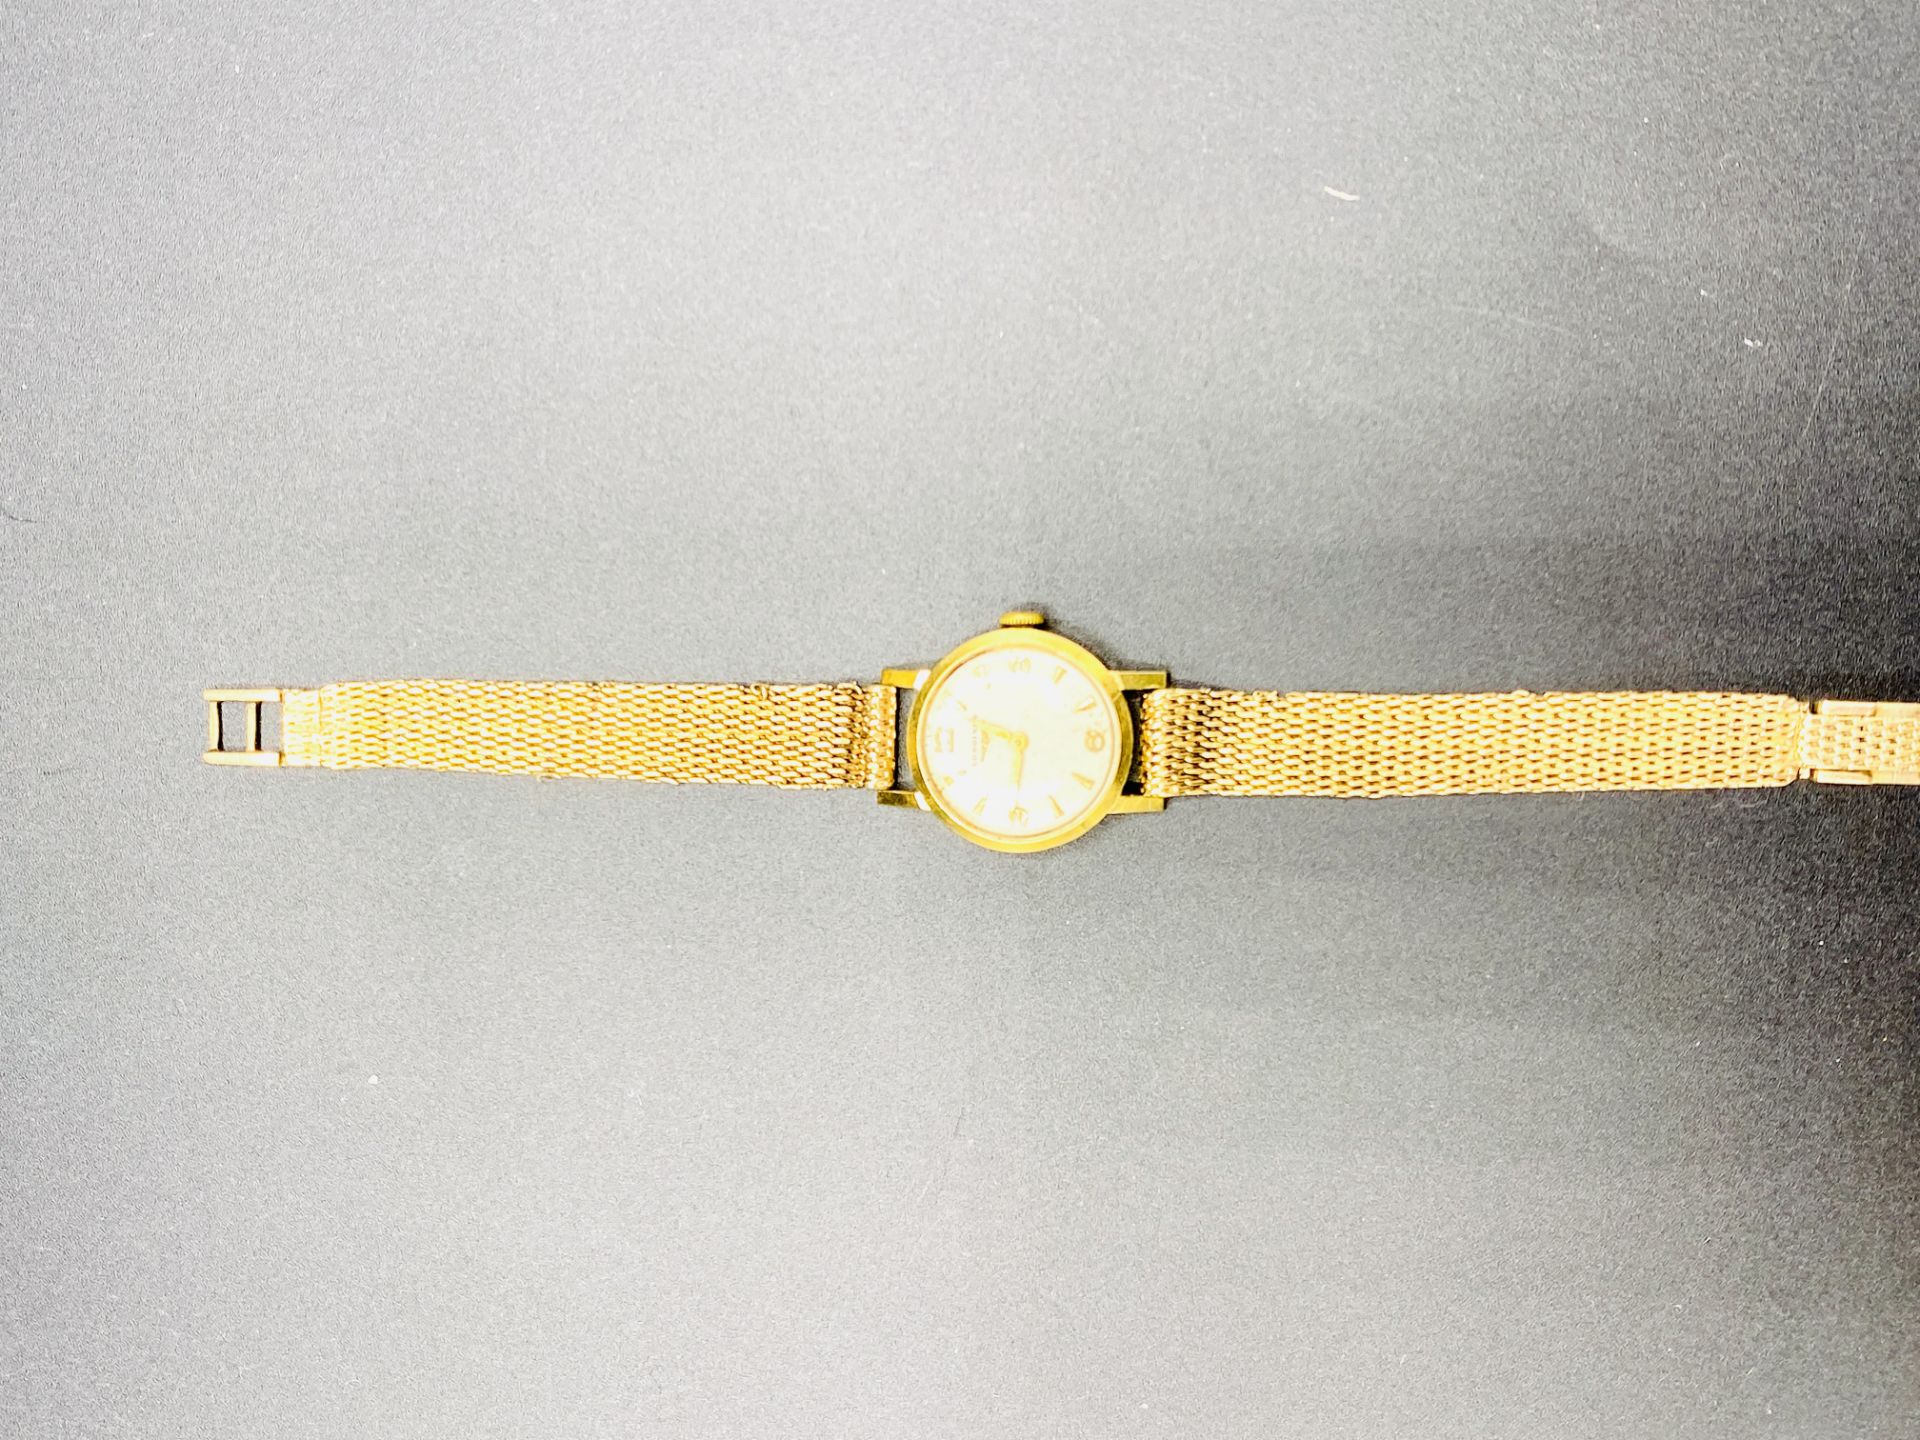 Longines 17 jewels manual wind ladies' wrist watch in 18ct gold case on 9ct gold strap - Image 5 of 6